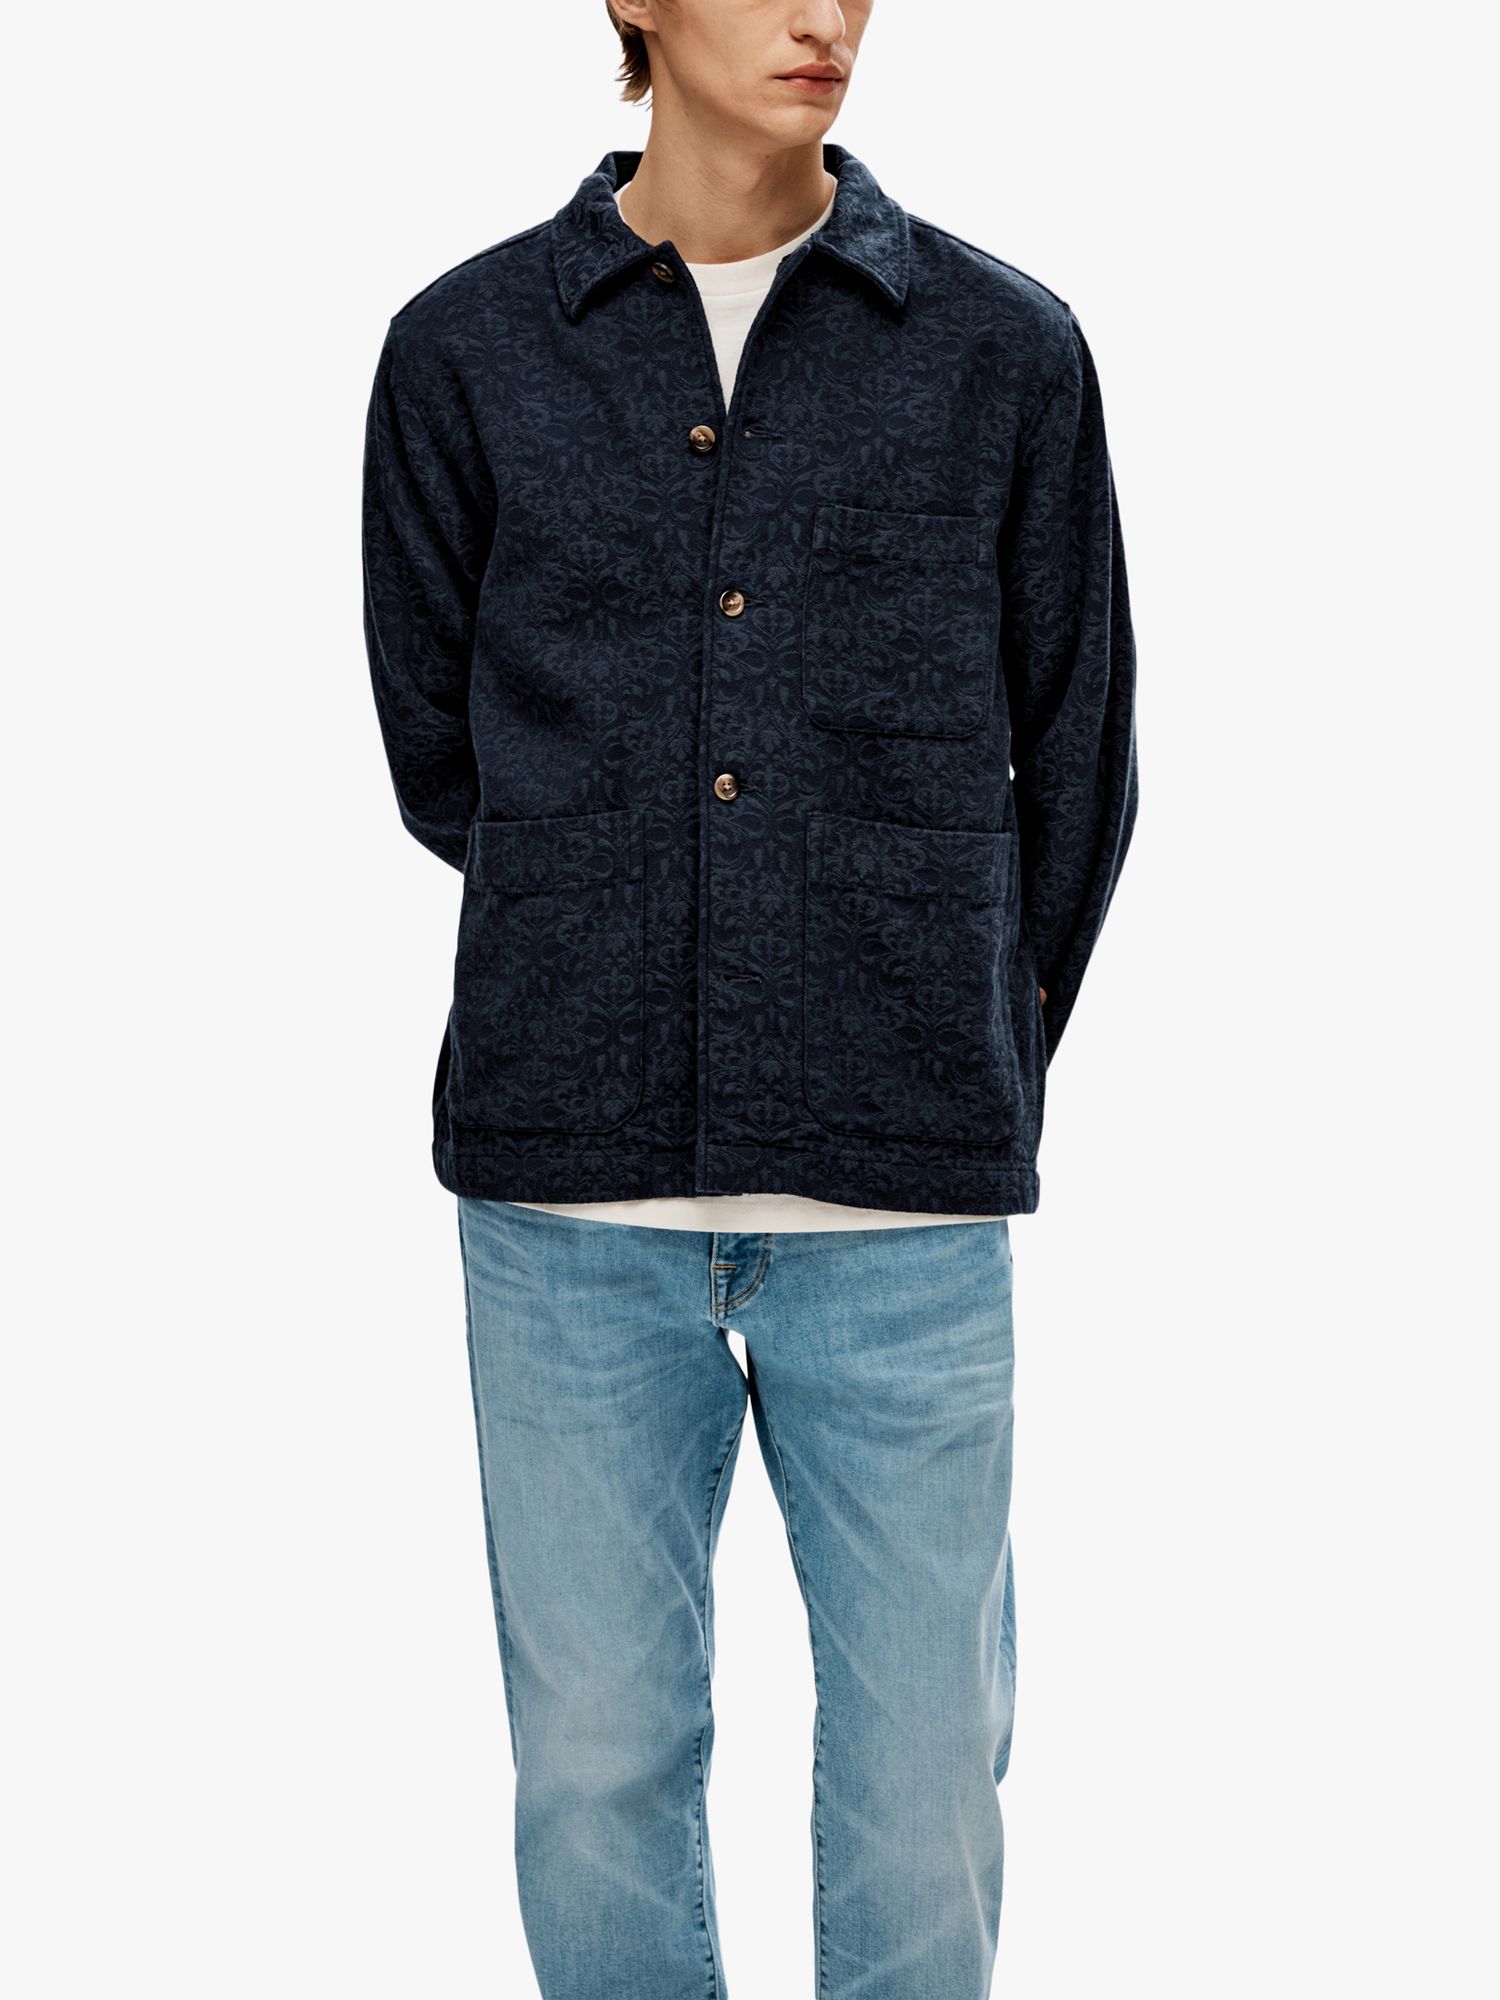 SELECTED HOMME Jason Overshirt, Navy, S